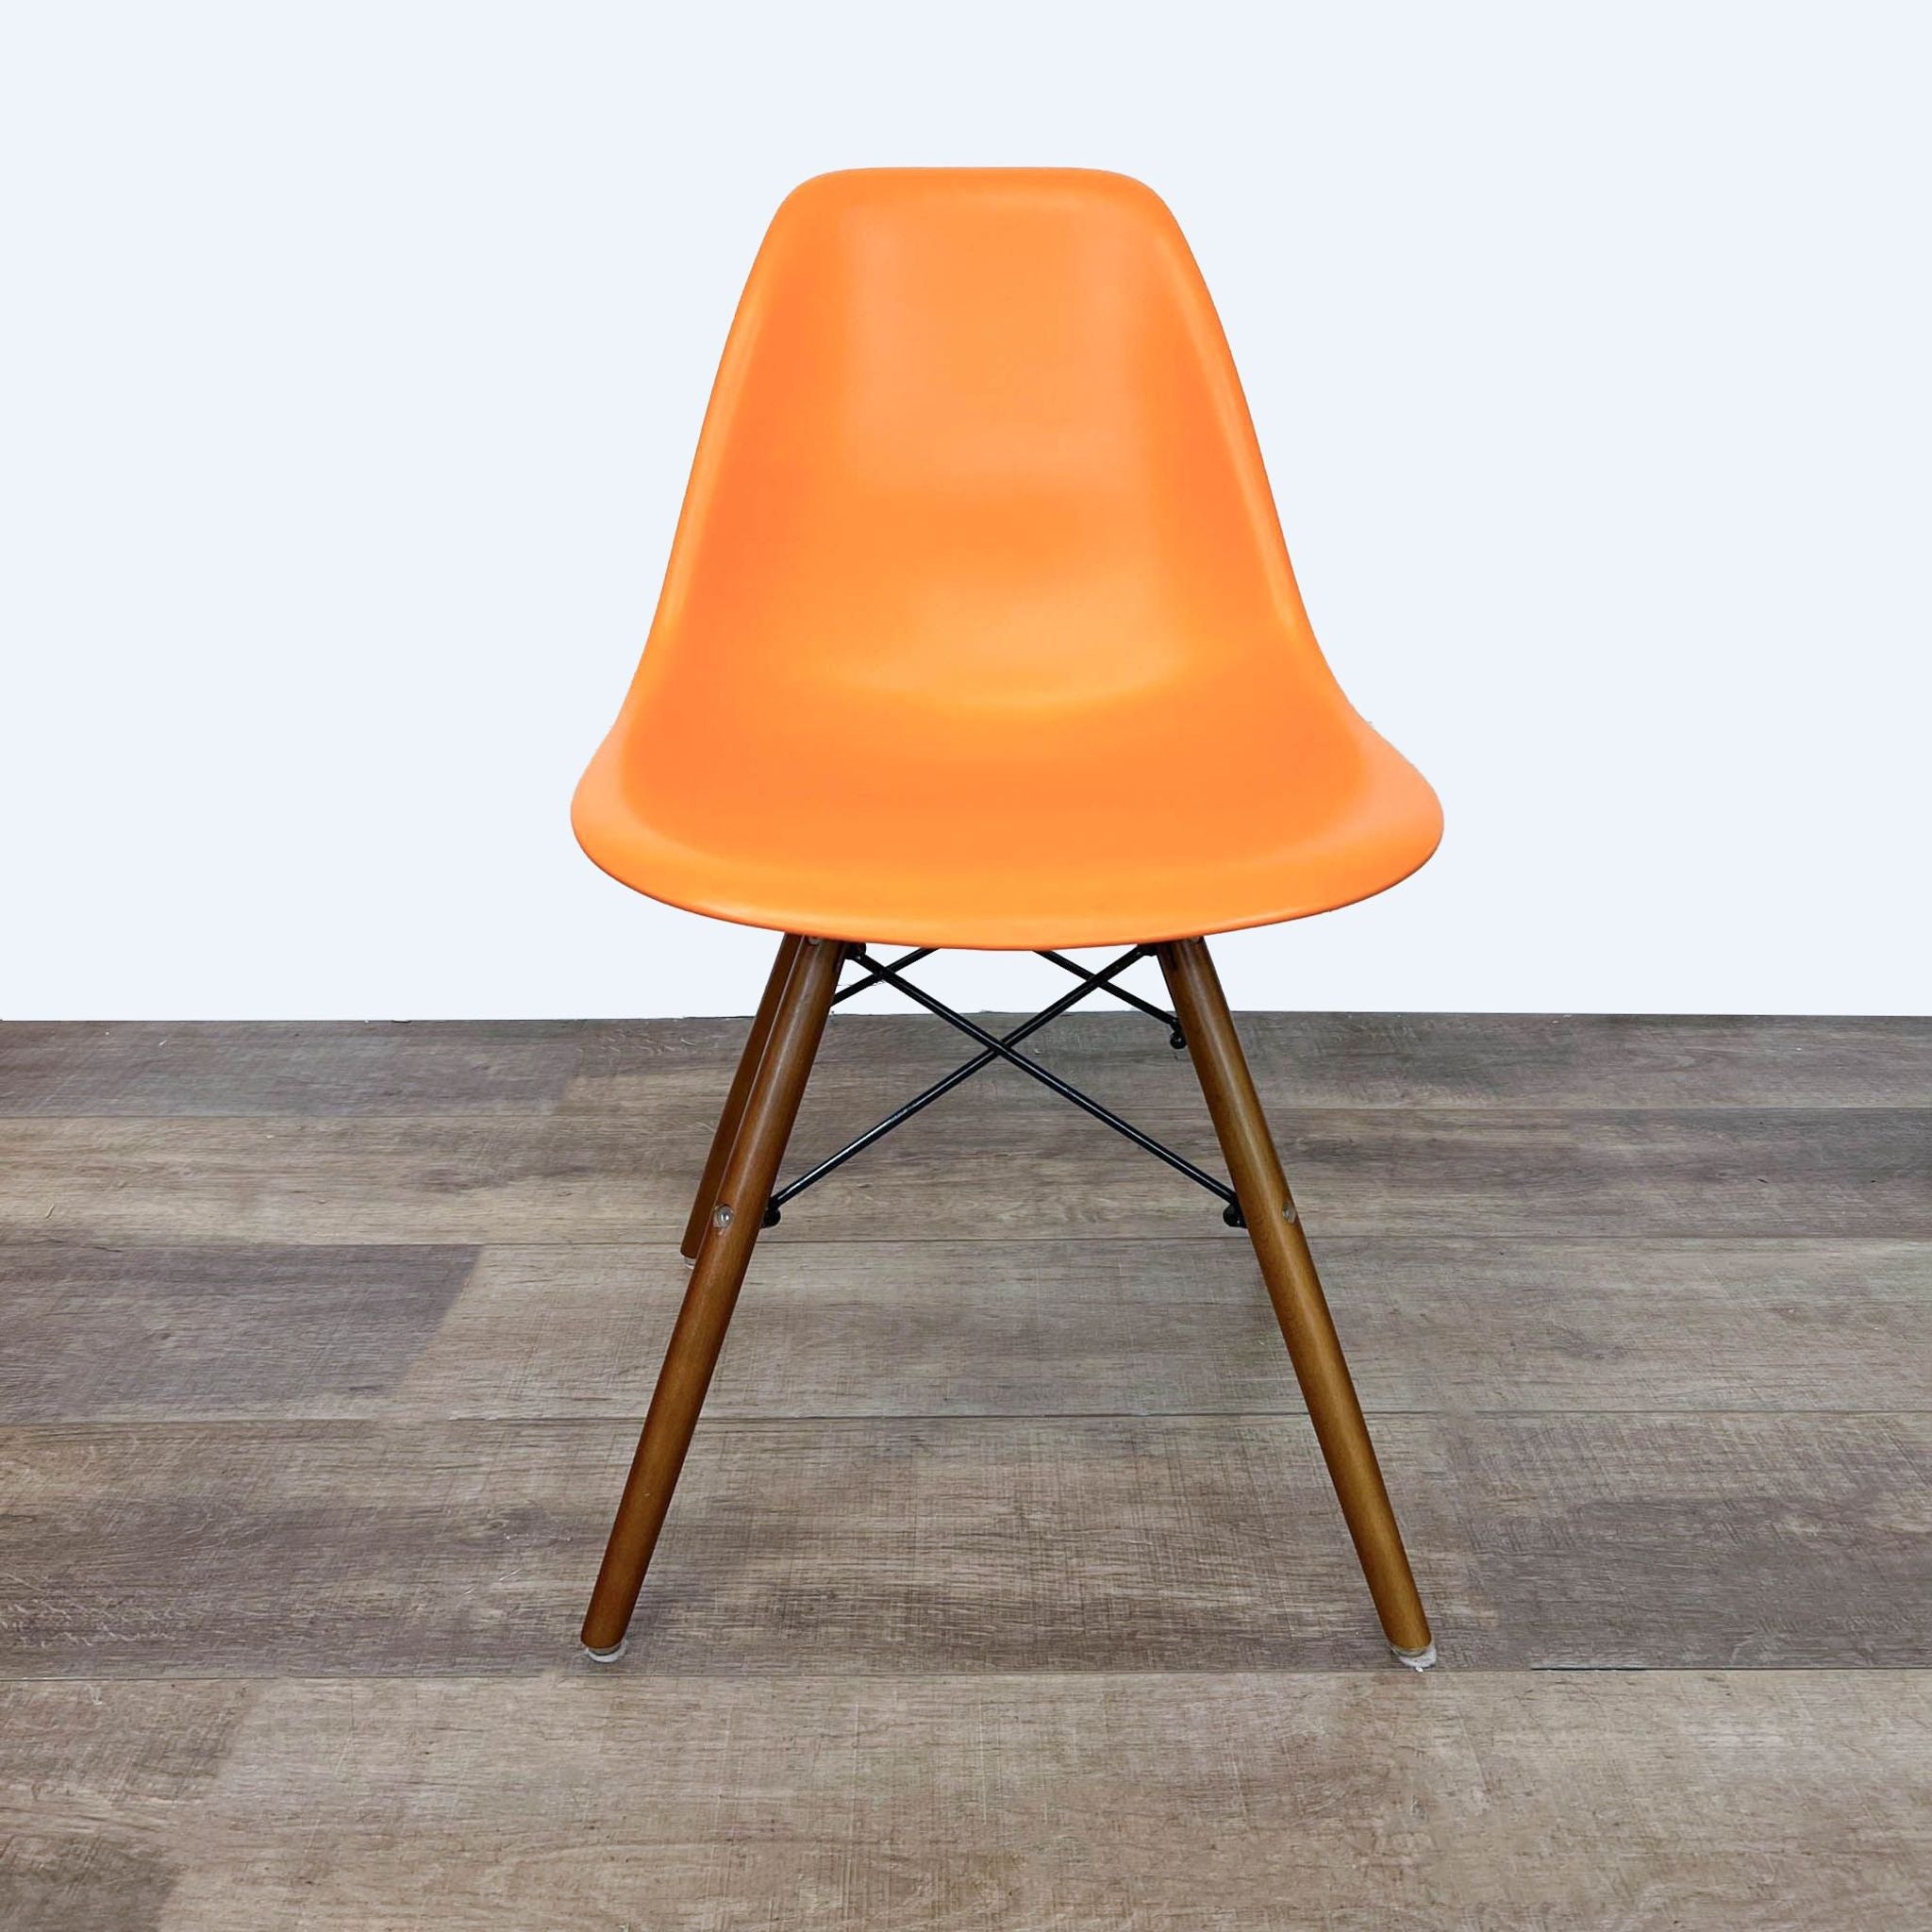 Reperch brand orange dining chair with ergonomic polypropylene seat and Eifel-style wooden legs on a hardwood floor.